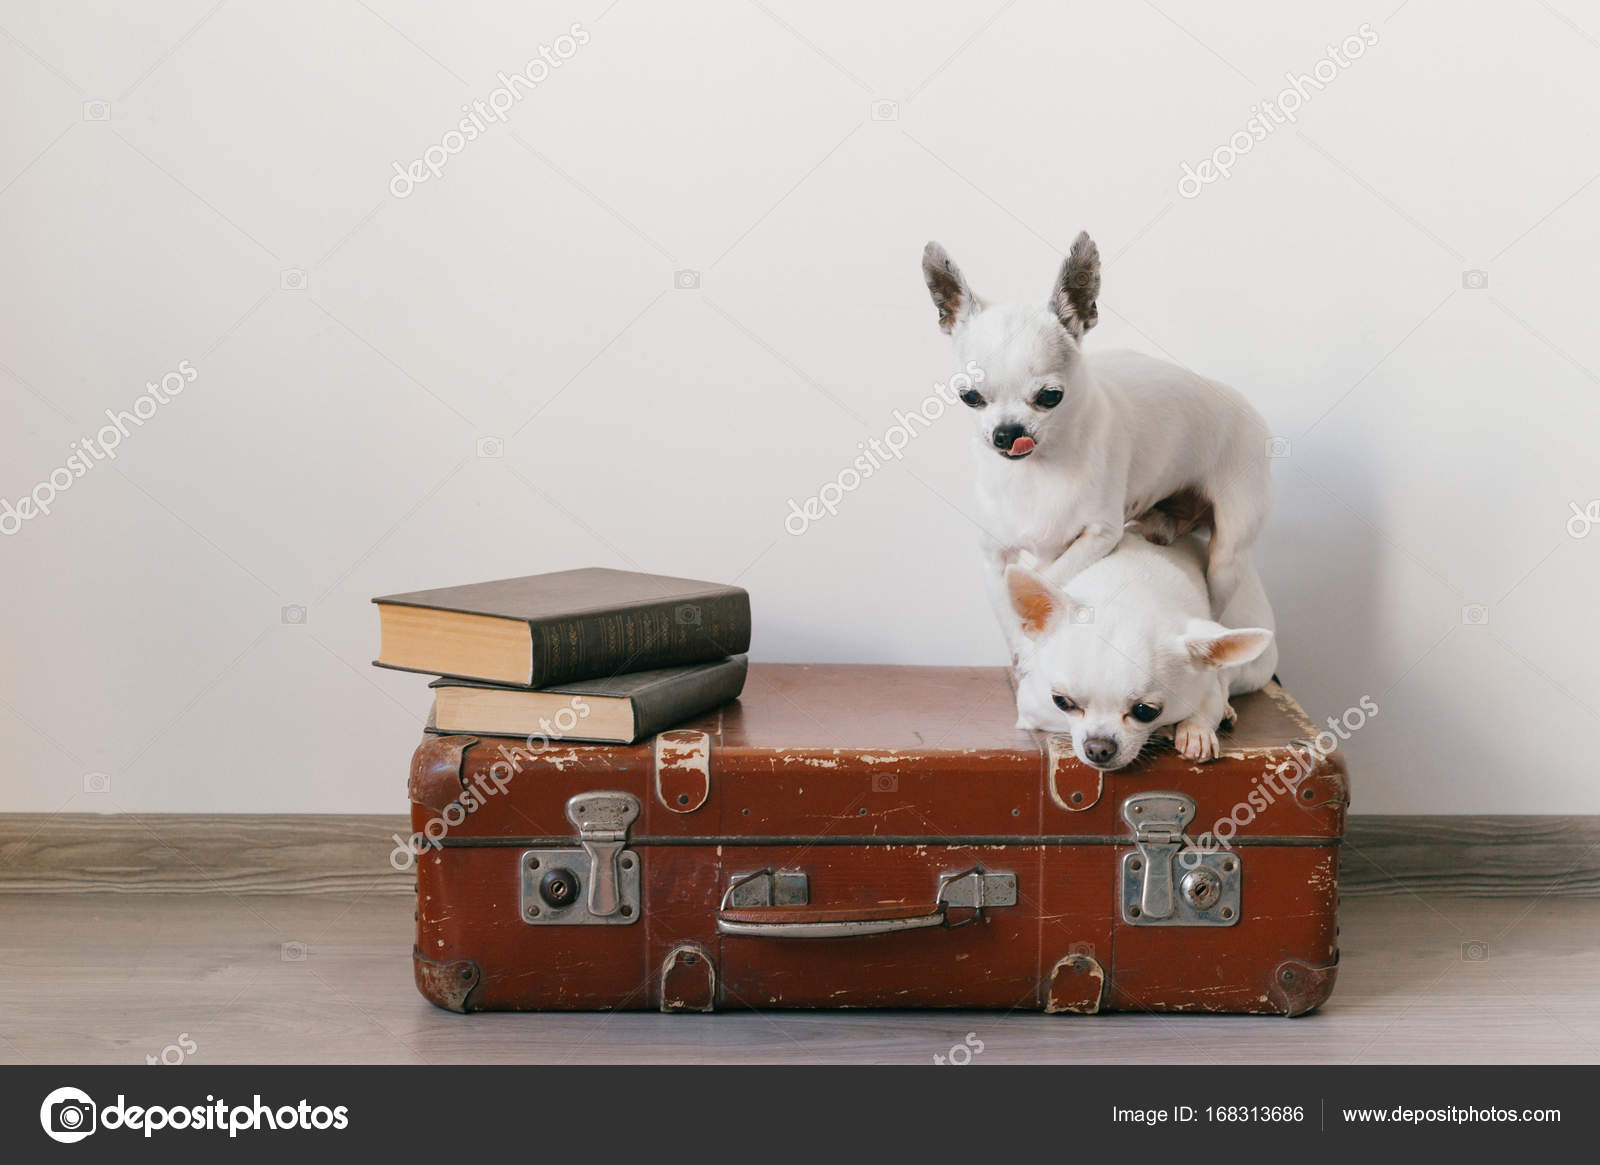 Dogs trying to make sex on retro vintage suitcase picture